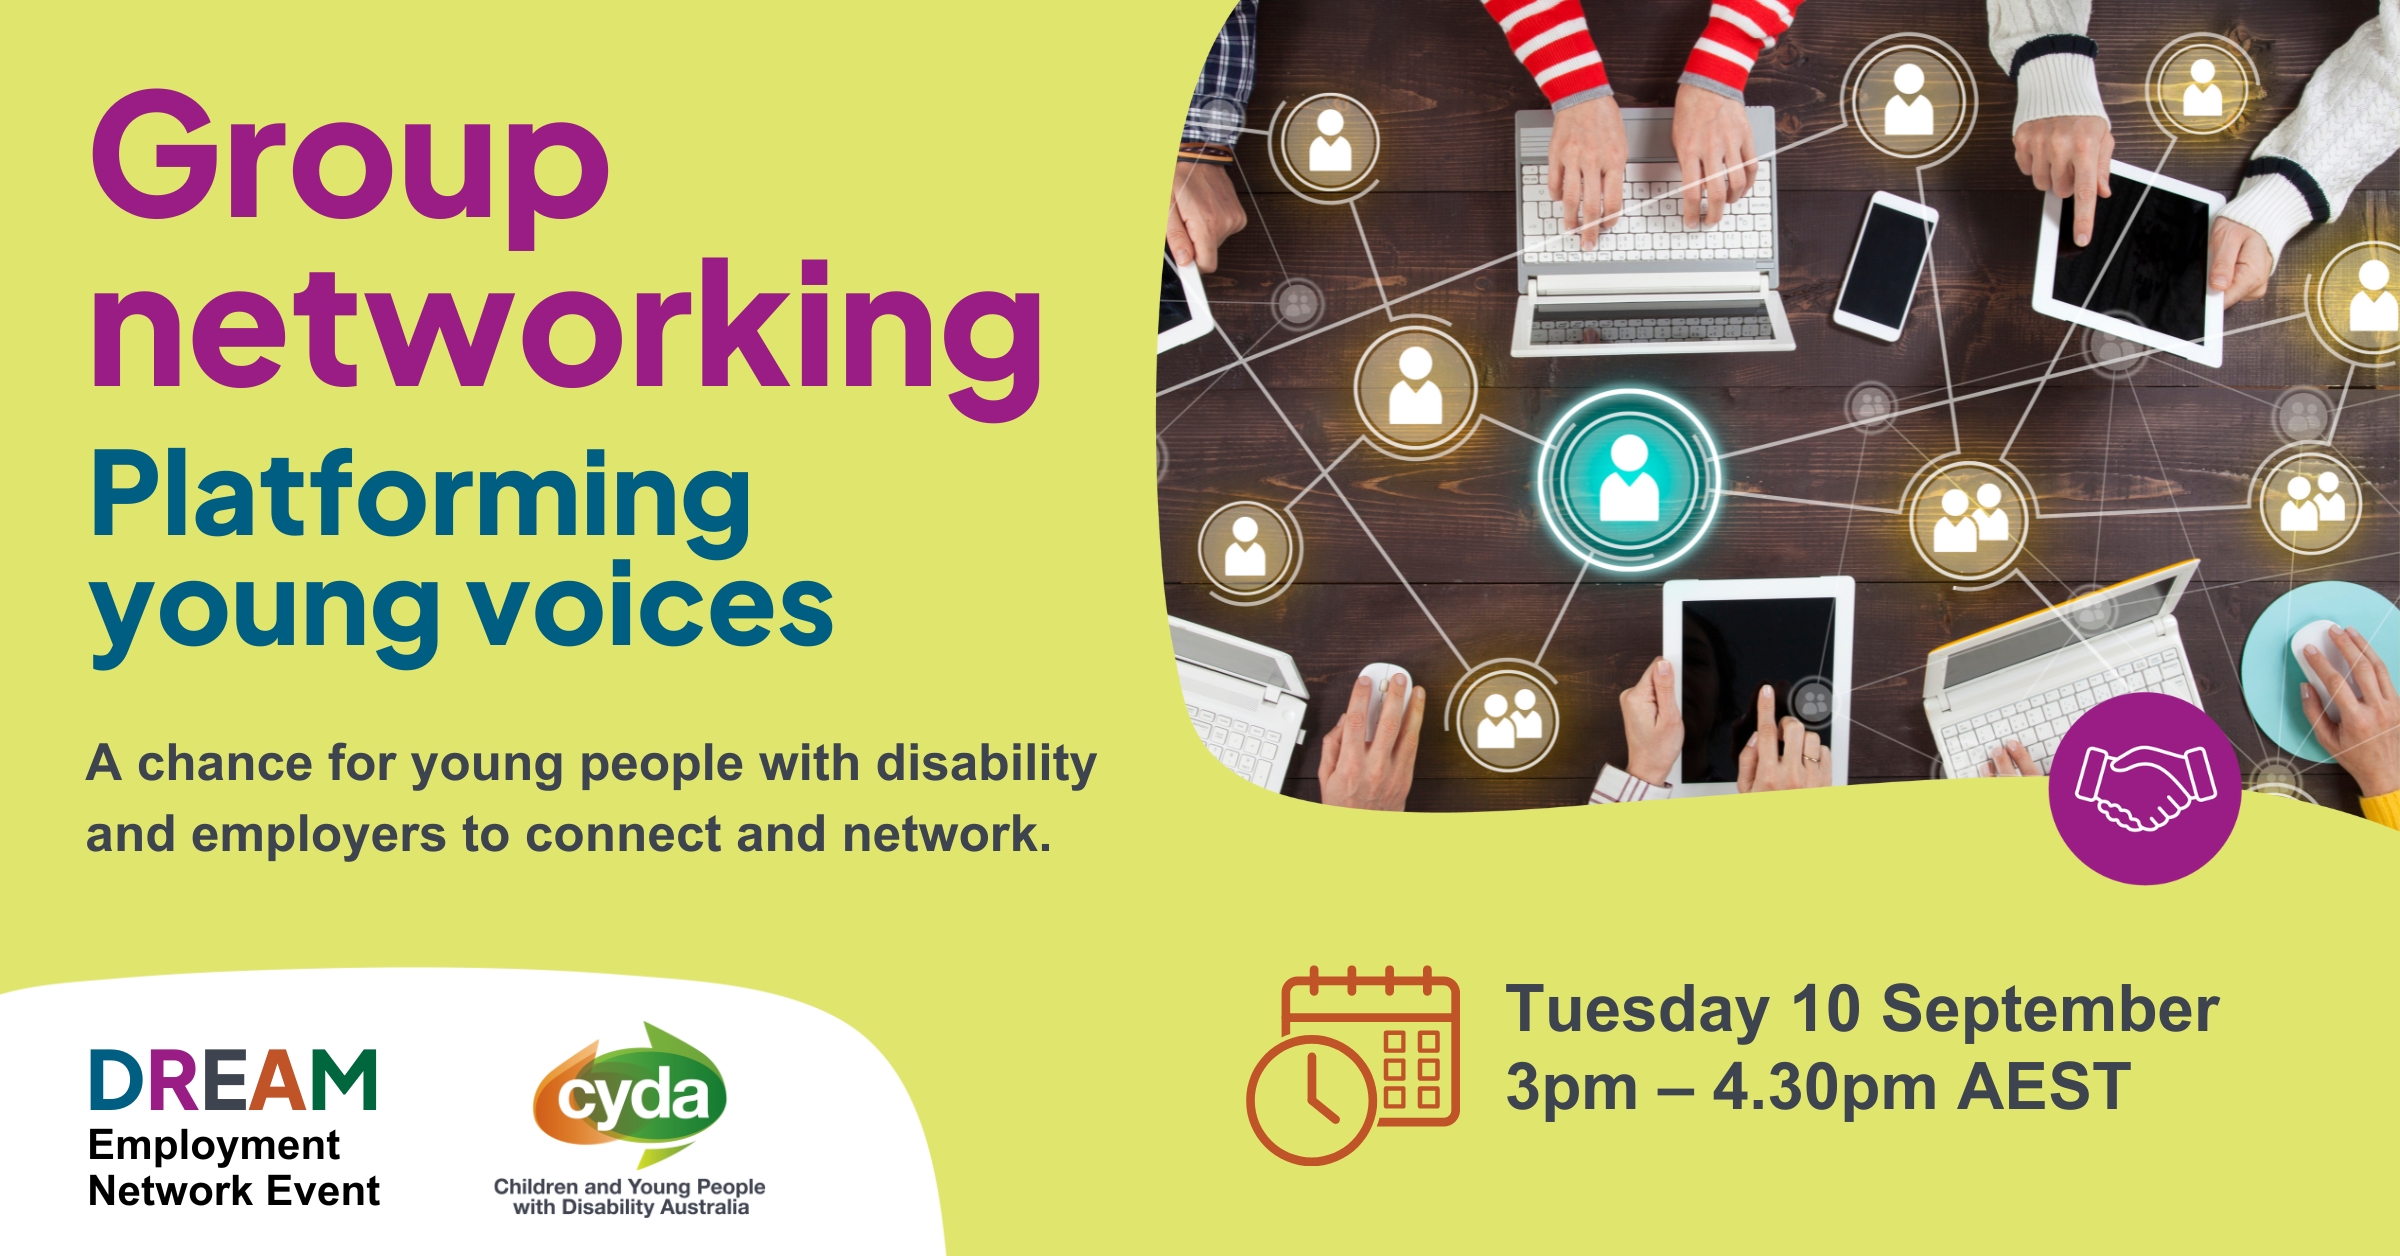 Text on a bright green background reads: "Group networking, platforming young voices. A chance for young people with disability and employers to connect and network. Tuesday 10 September, 3pm – 4.30pm AEST." Below are the logos for the DREAM Employment Network and CYDA. To the right is a photograph of hands at computers and mobile devices around a wood table, taken from above, overlaid with a graphic of people in circles, networked together with connecting lines.